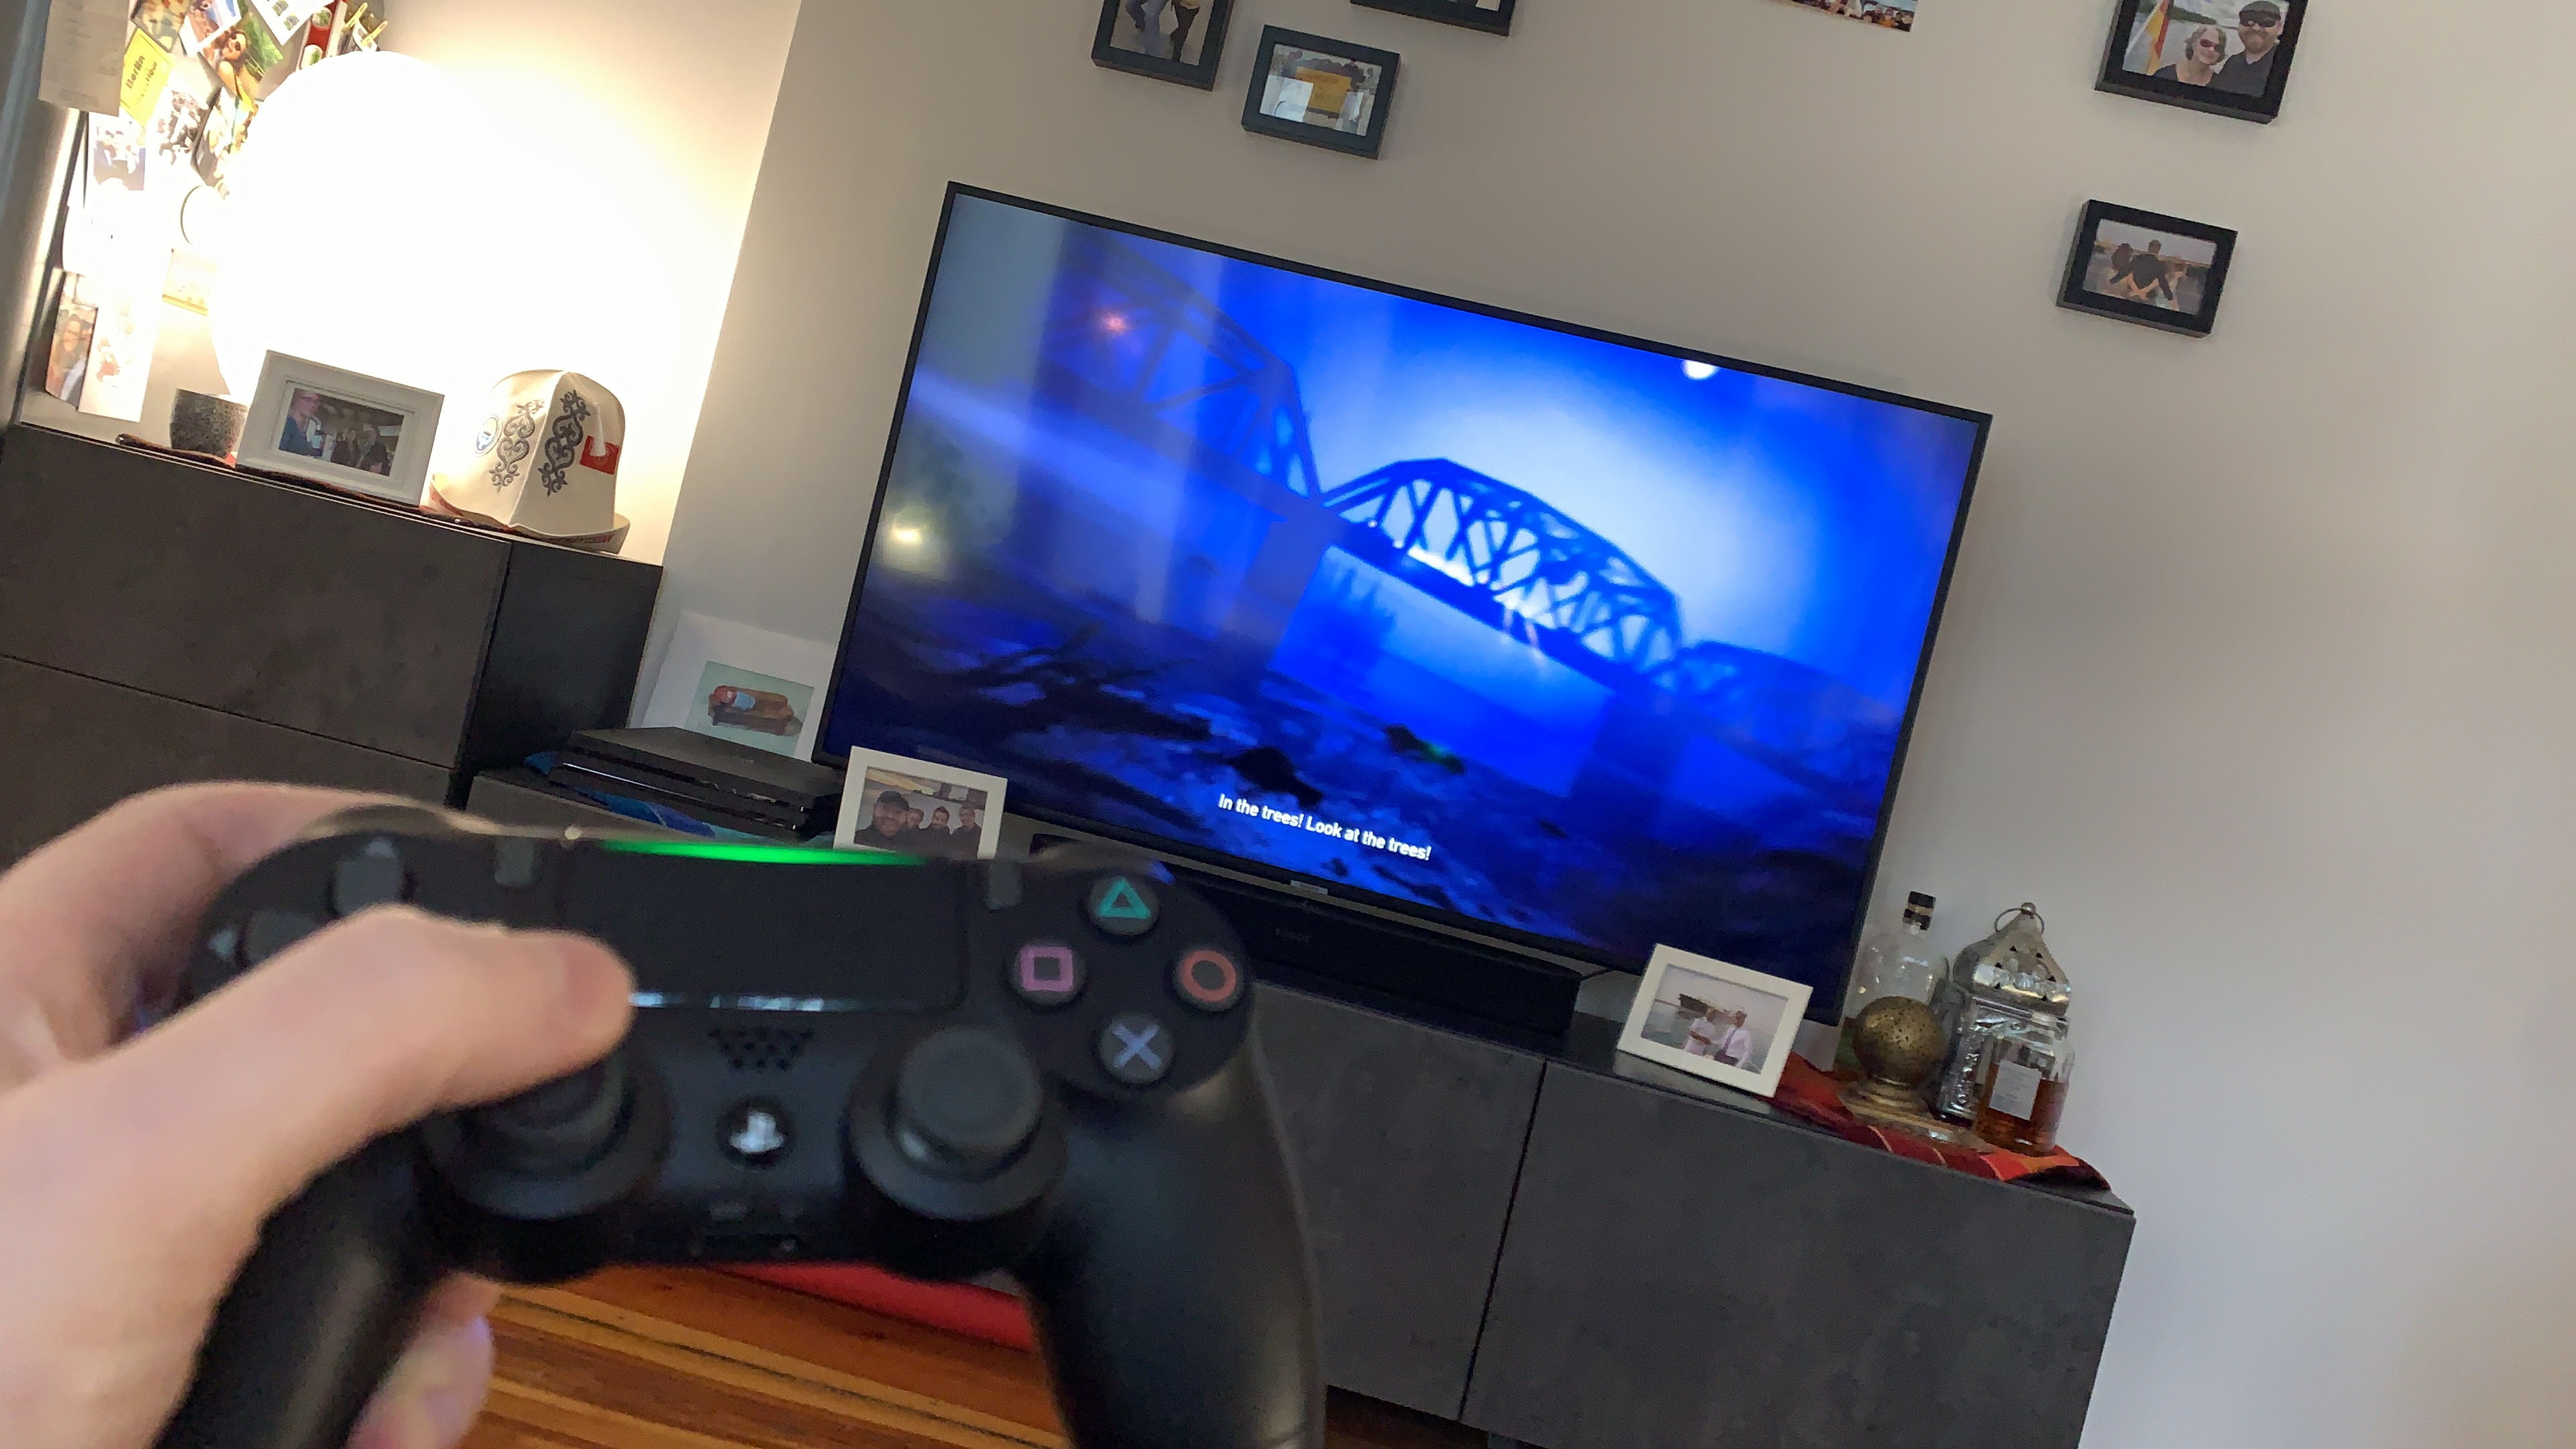 Showing off my PS4 controller at home with Unchartered four playing in the background